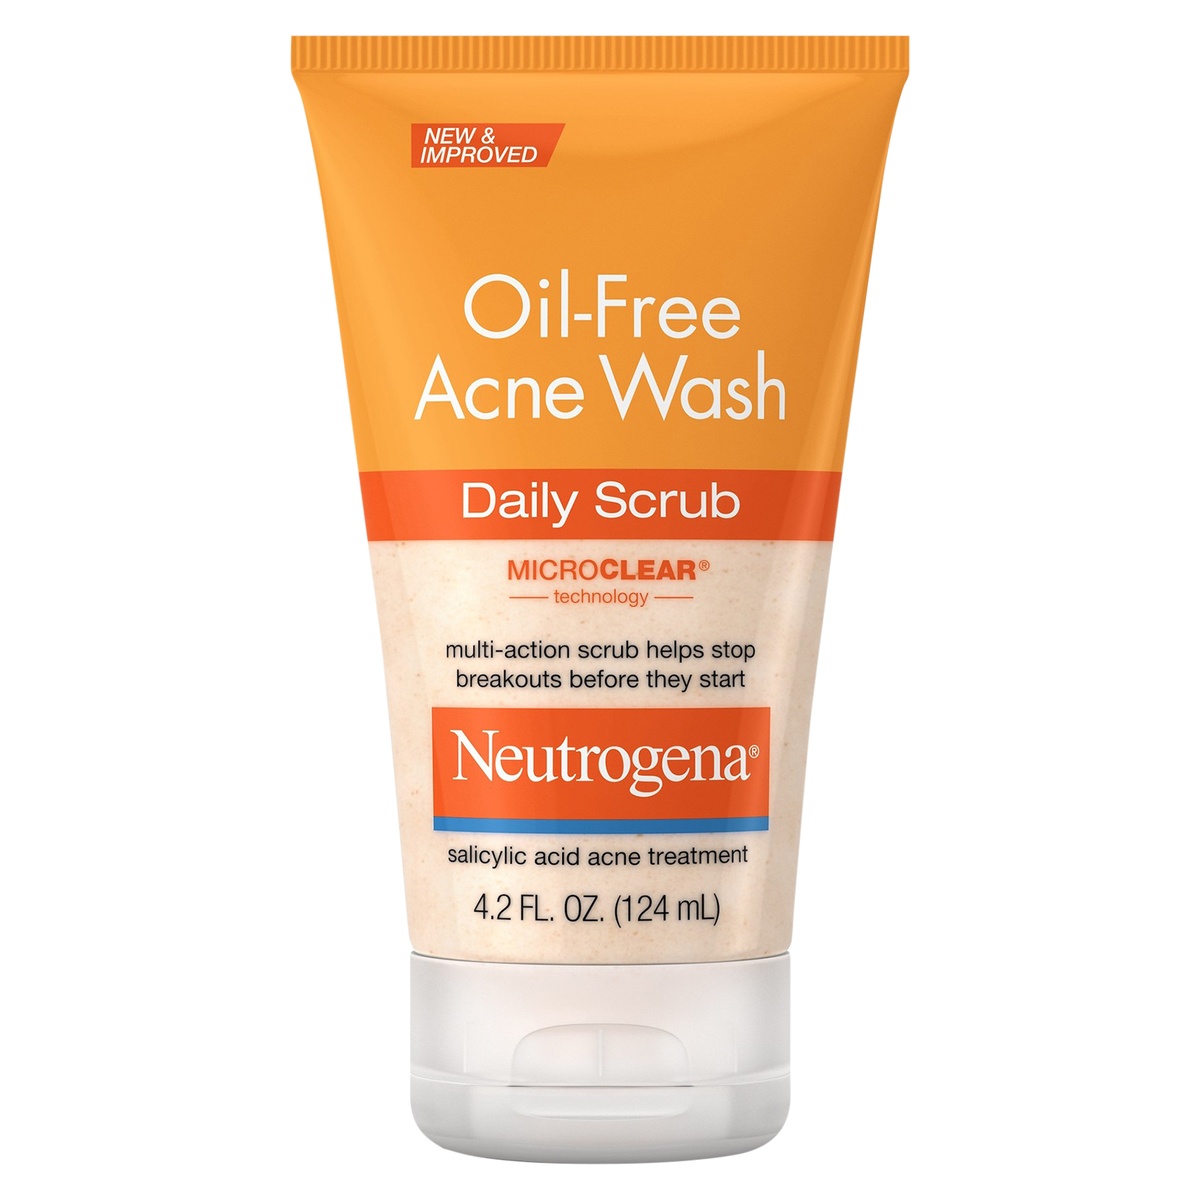 slide 1 of 1, Neutrogena Oil-Free Acne Face Scrub, 2% Salicylic Acid Acne Treatment Medicine, Daily Face Wash to help Prevent Breakouts, Oil Free Exfoliating Facial Cleanser for Acne-Prone Skin, 4.2 fl oz